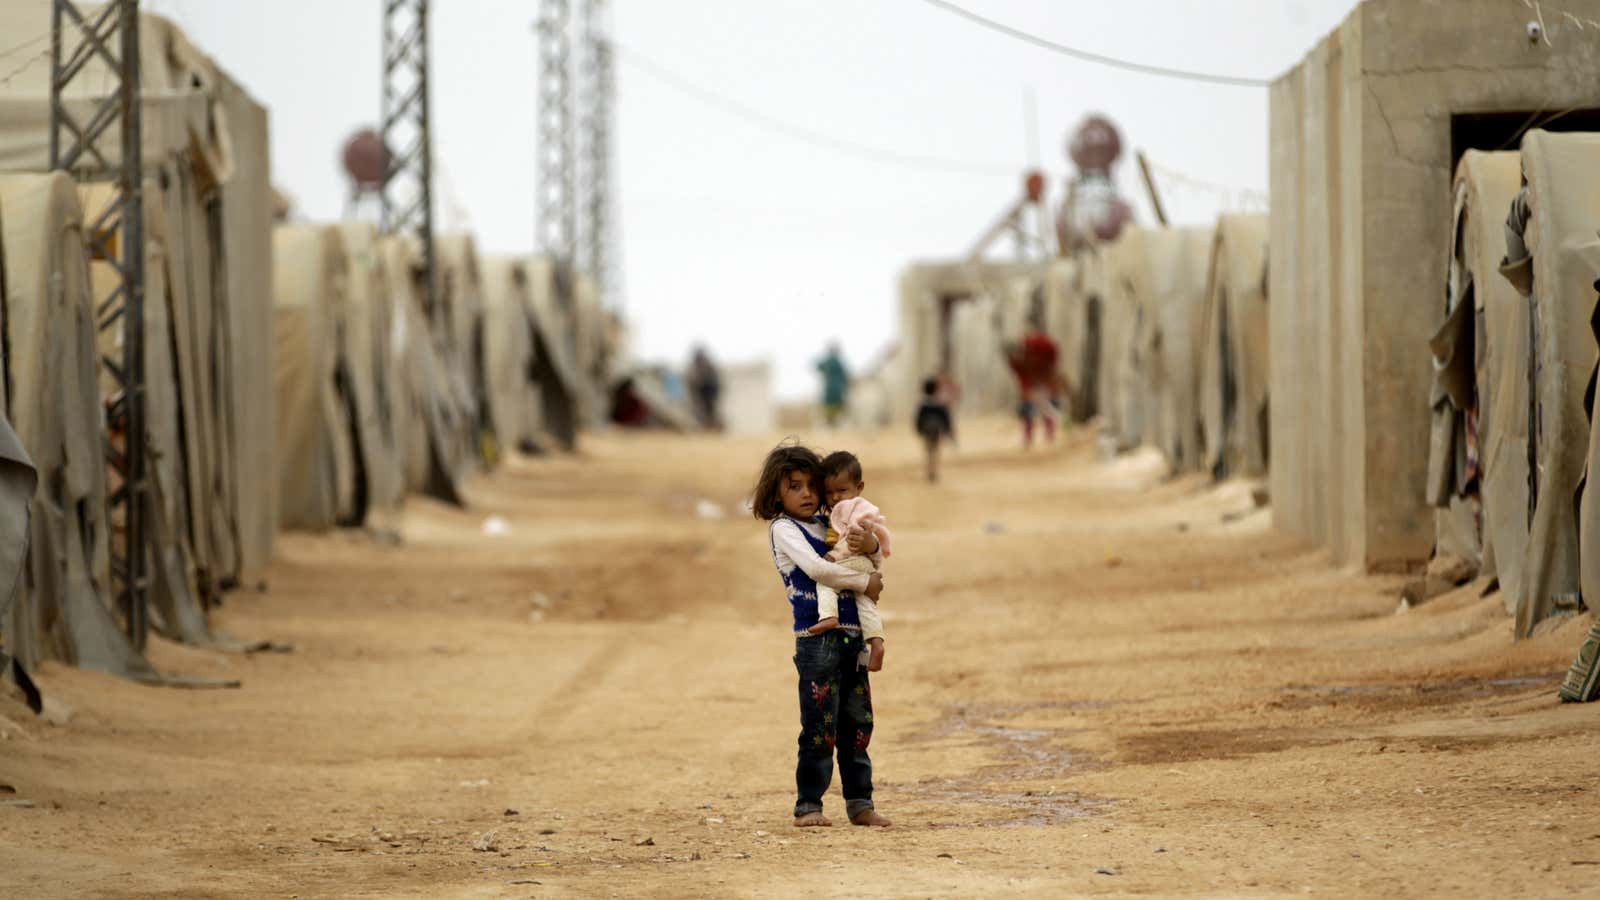 Thousands of children have been affected by the Syria conflict.